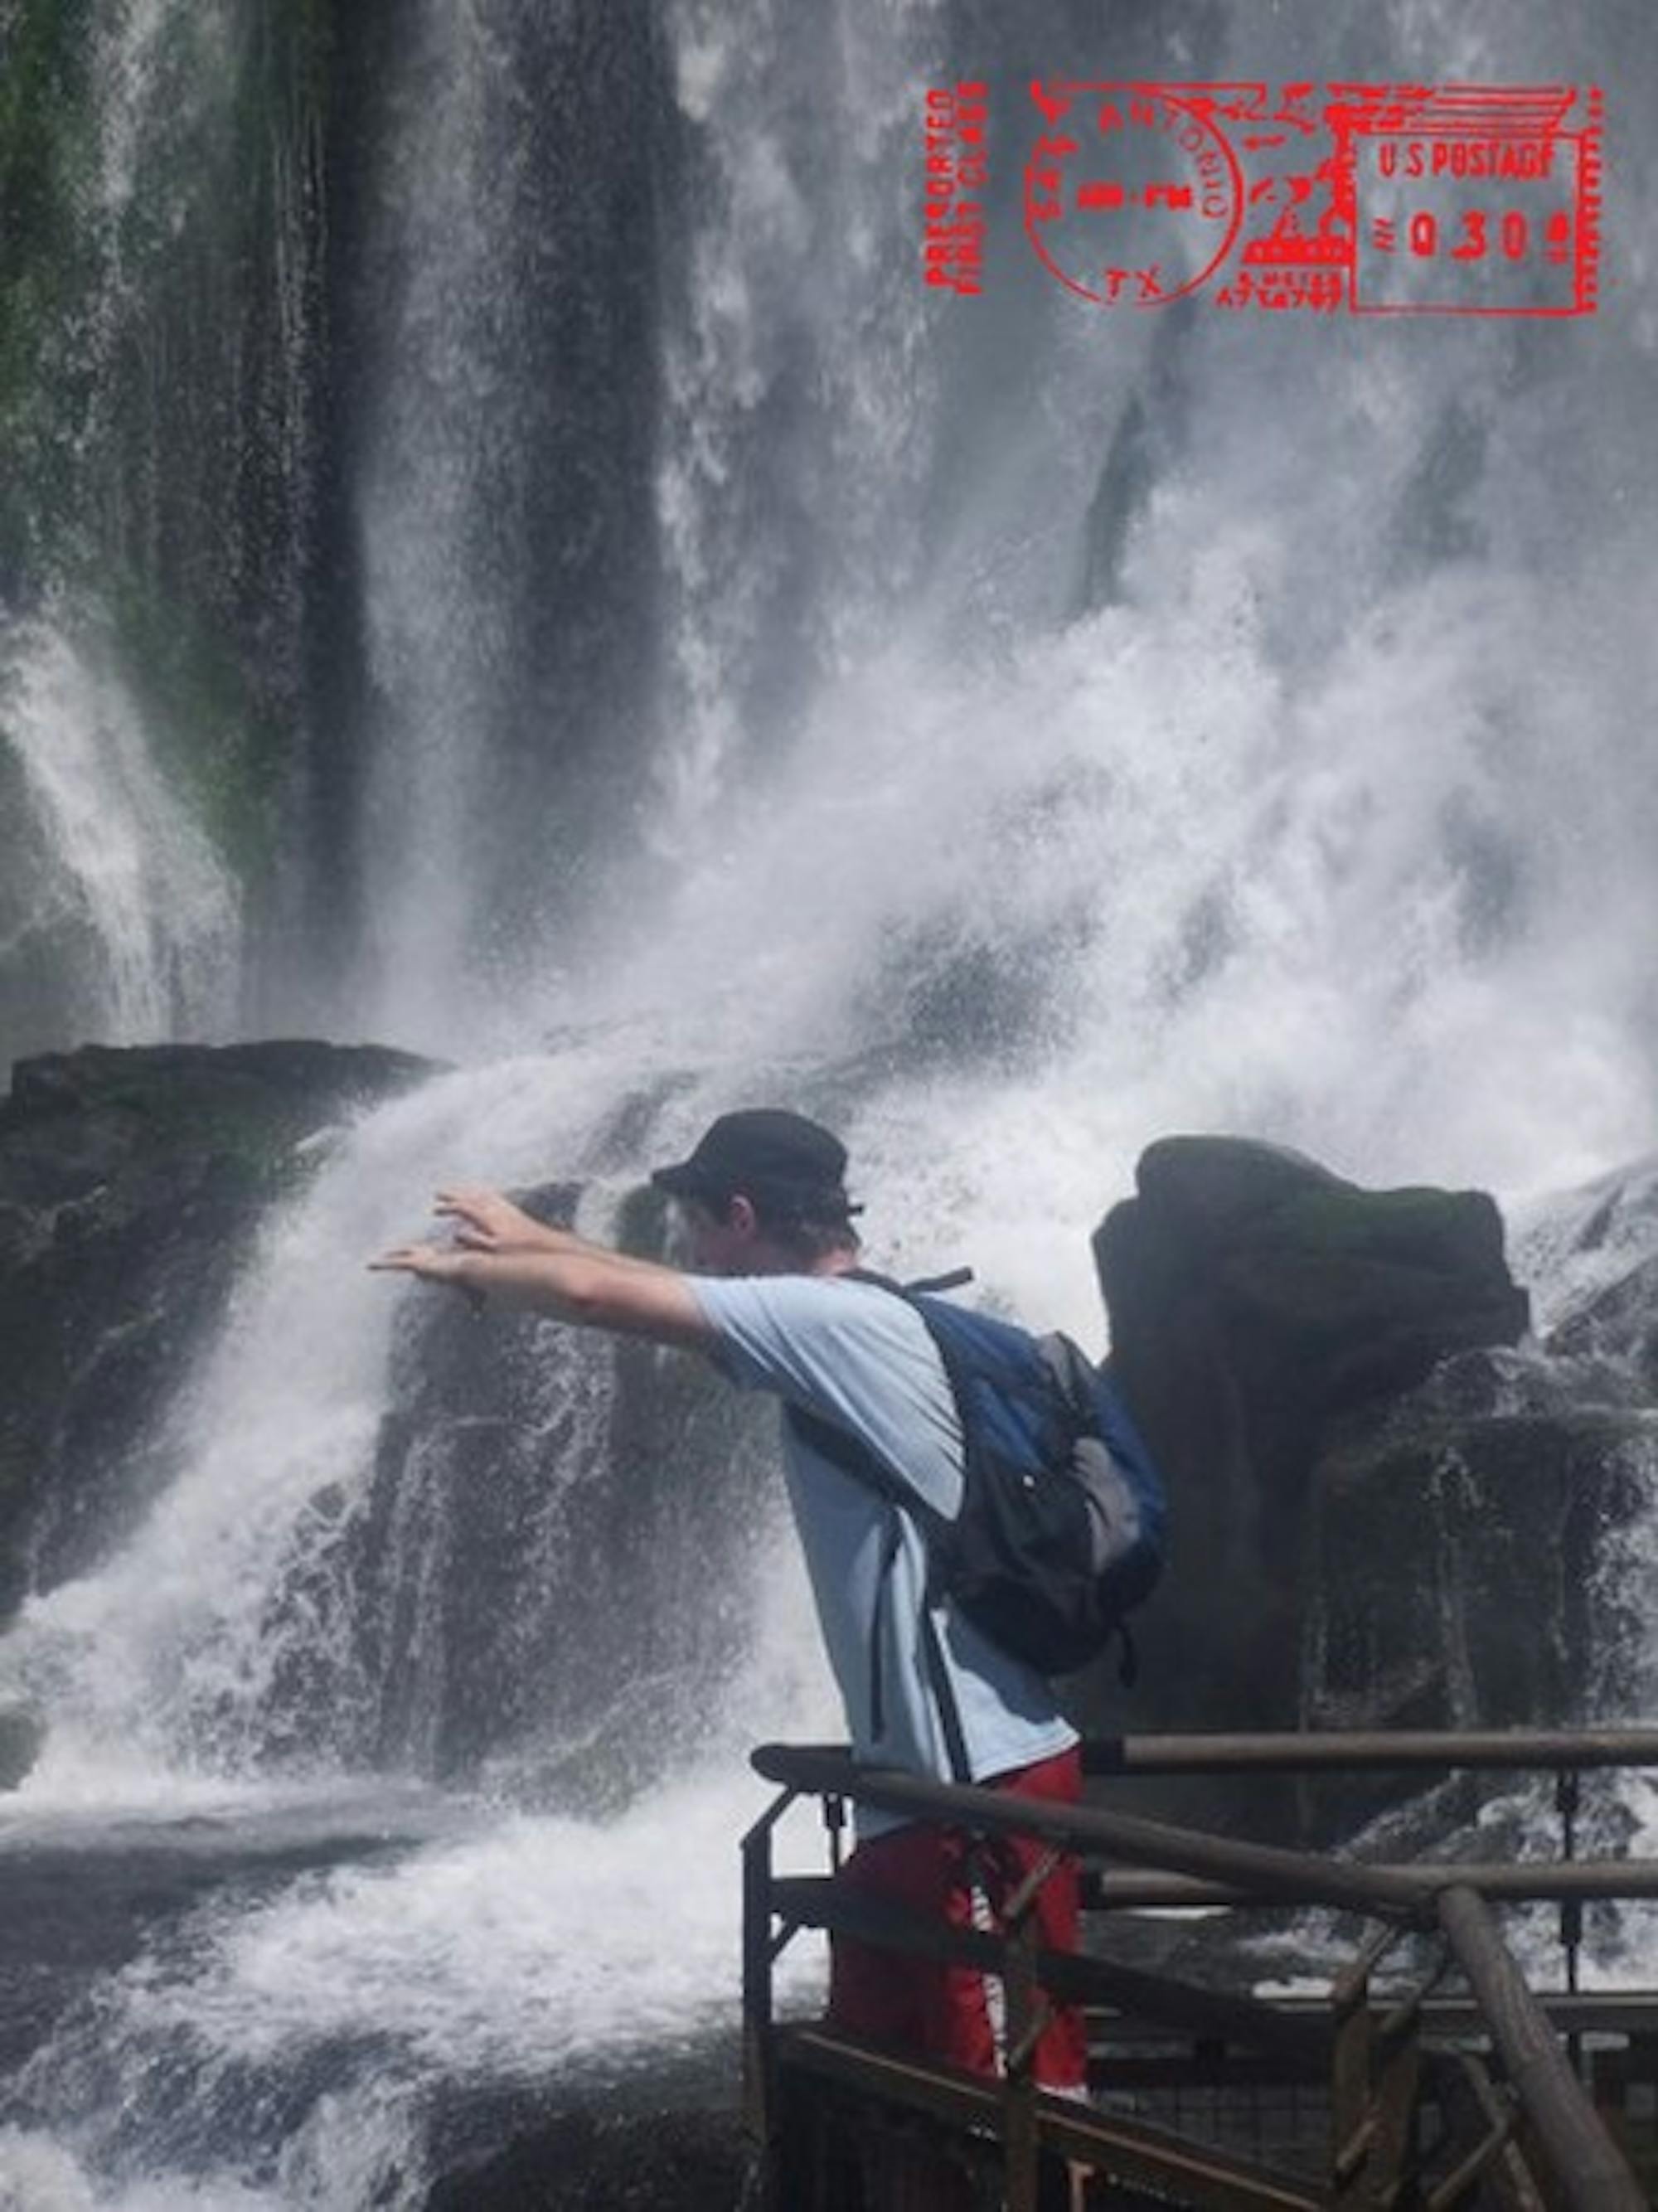 Elliot Mattingly at the famed Iguazu falls, one of the seven natural wonders of the world, on the Brazilian-Argentine border.